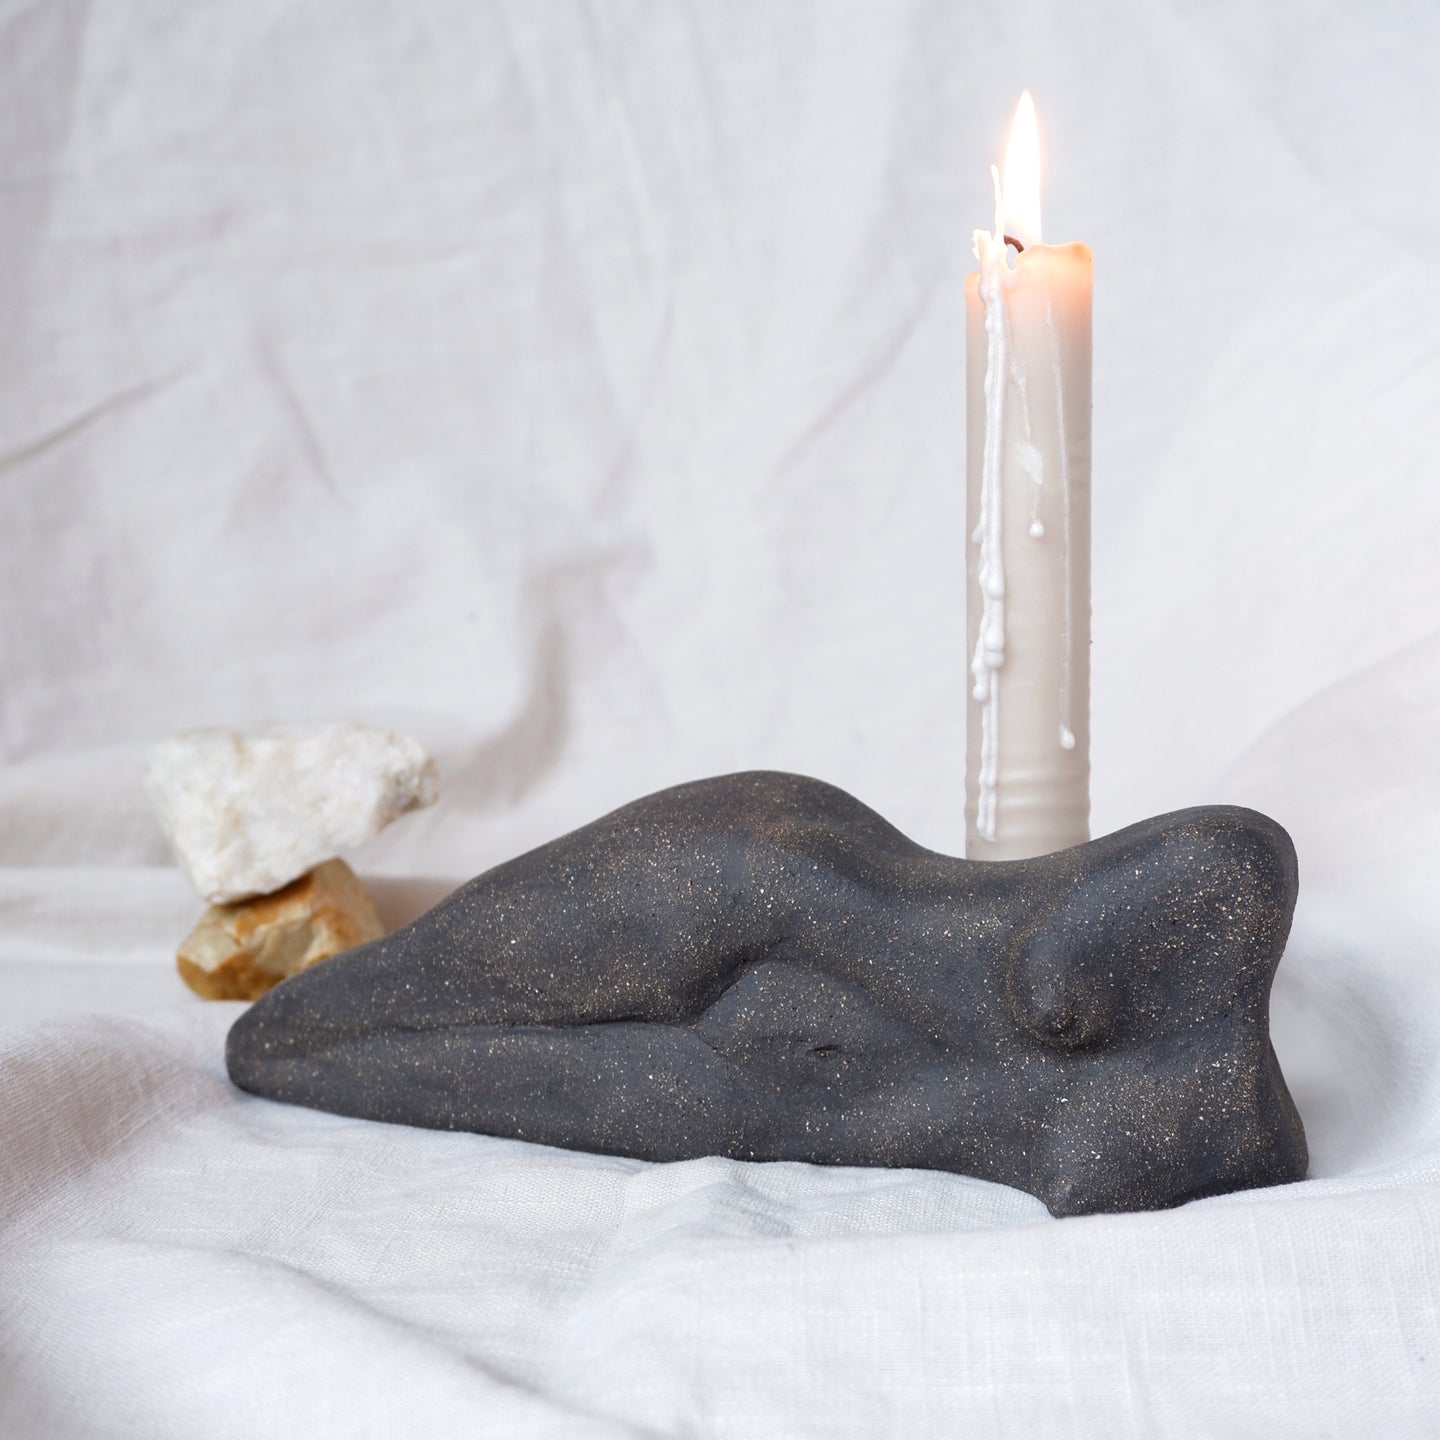 Handmade Ceramic Sculpture with a Candle Holder